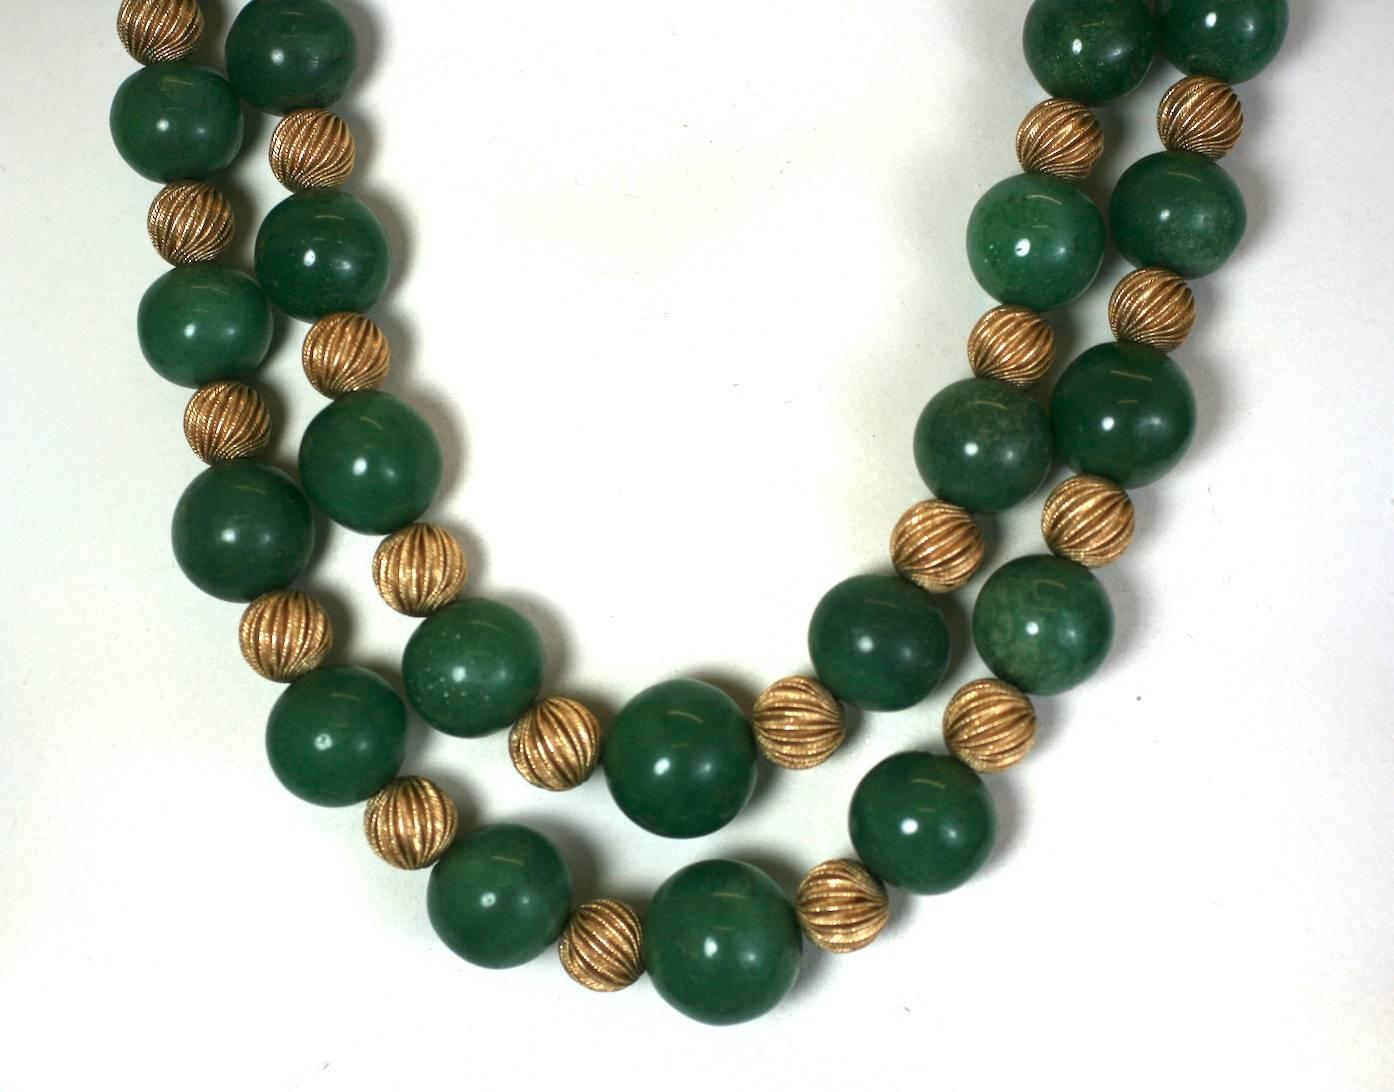 Striking and substantial Adventurine bead and Ribbed Gold Bead Necklace. Double strand with fluted, ribbed gold 14k beads alternating with deep green, slightly sparkly adventurine beads. Large flat cabochon clasp with 14k gold twist detailing. 
23